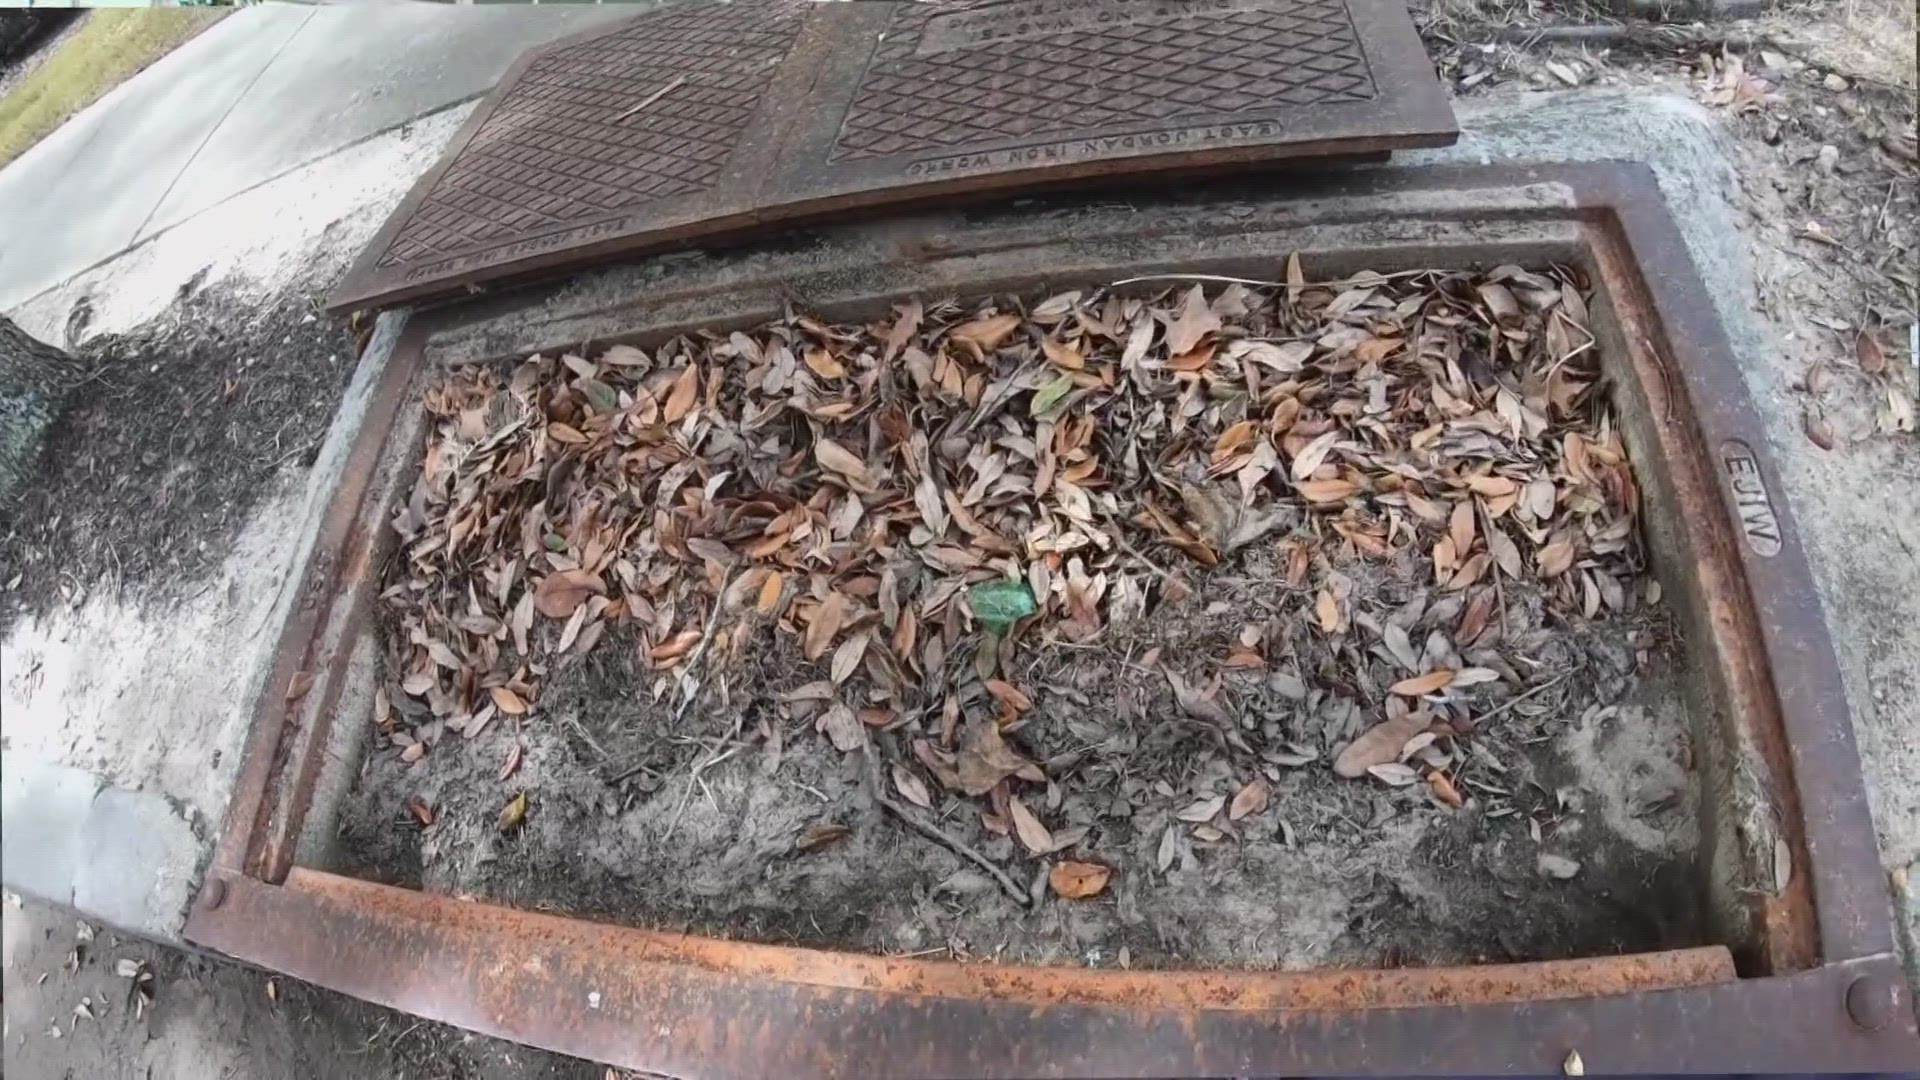 The New Orleans city council grilled the Department of Public Works over clogged catch basins and other problems with streetlights.